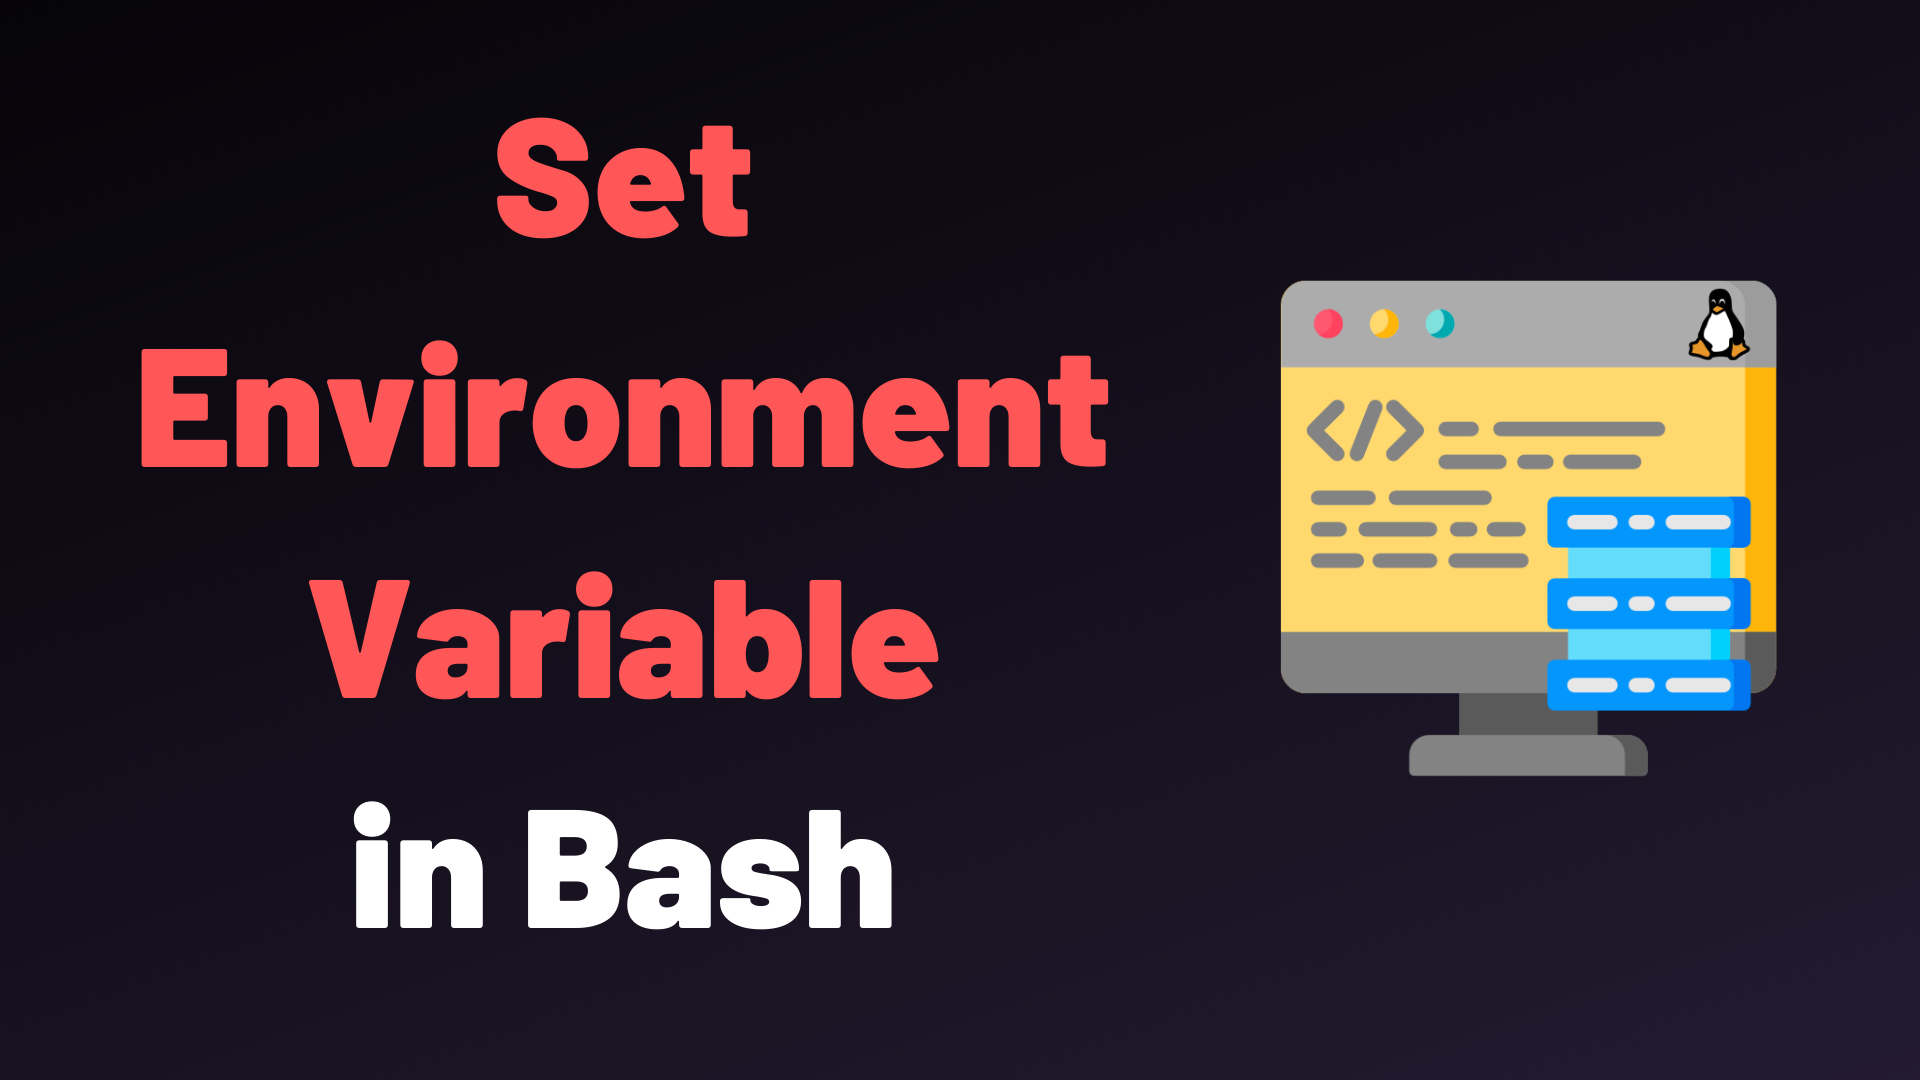 How To Set Environment Variable in Bash